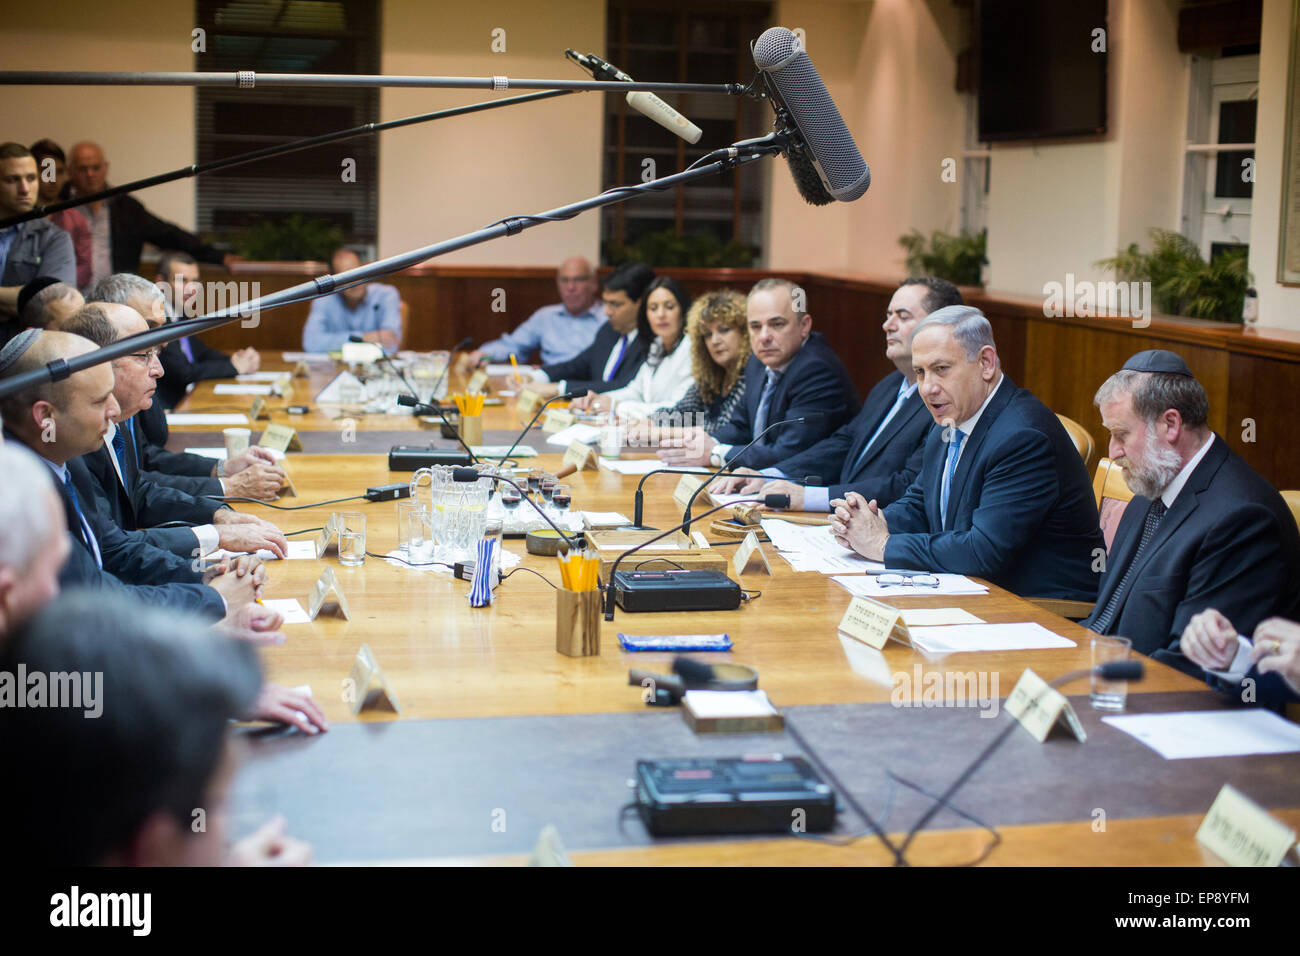 Jerusalem. 15th May, 2015. Israeli Prime Minister Benjamin Netanyahu (2nd R) addresses the first cabinet meeting of the Israel's 34th government at the Prime Minister's office in Jerusalem, on May 15, 2015. Israeli Prime Minister Benjamin Netanyahu's right-wing new coalition government was sworn in late Thursday night, after the parliament approved it by a razor-thin 61-59 majority. Credit:  JINI/Yonatan Sindel/Xinhua/Alamy Live News Stock Photo